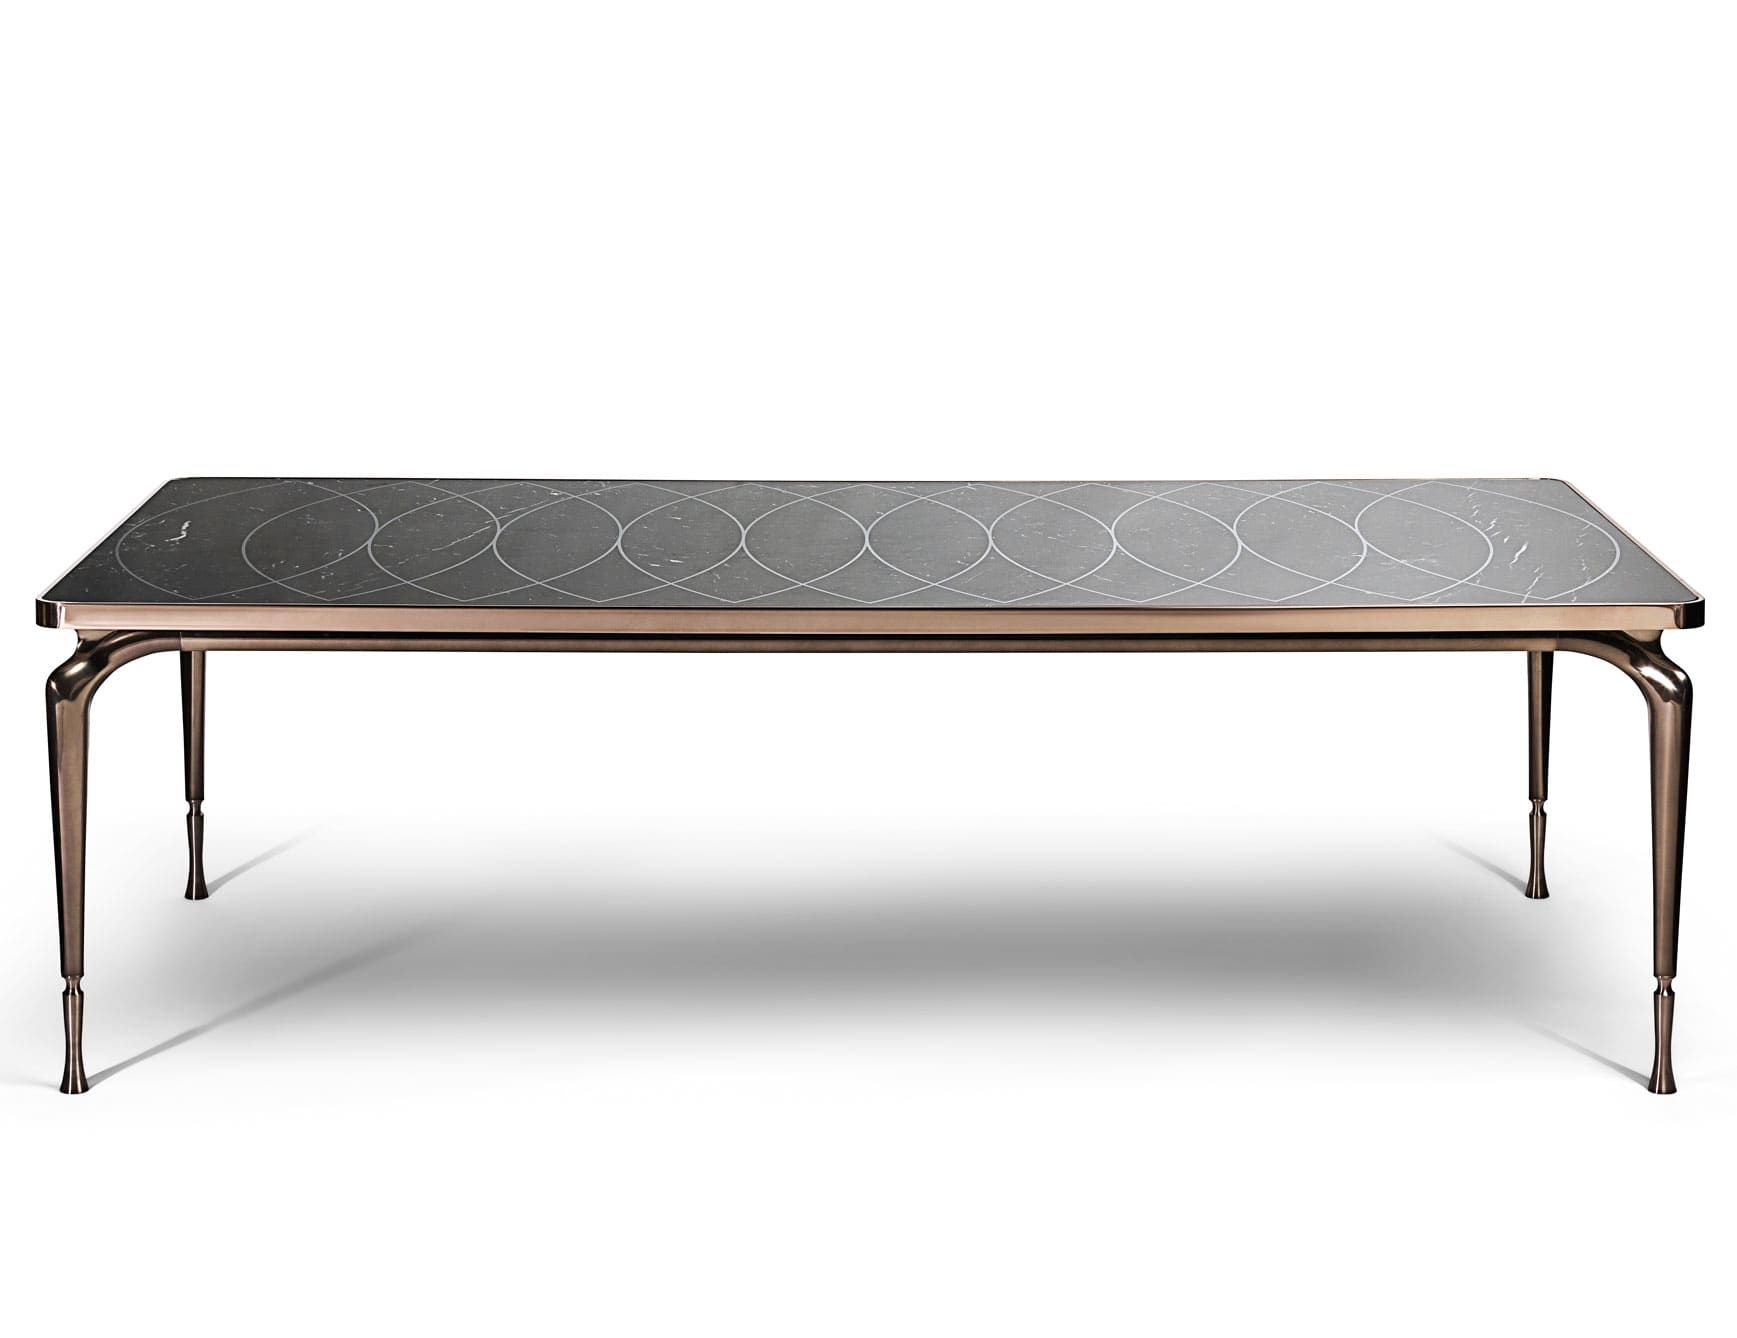 Thule modern luxury table with black Marquinia marble